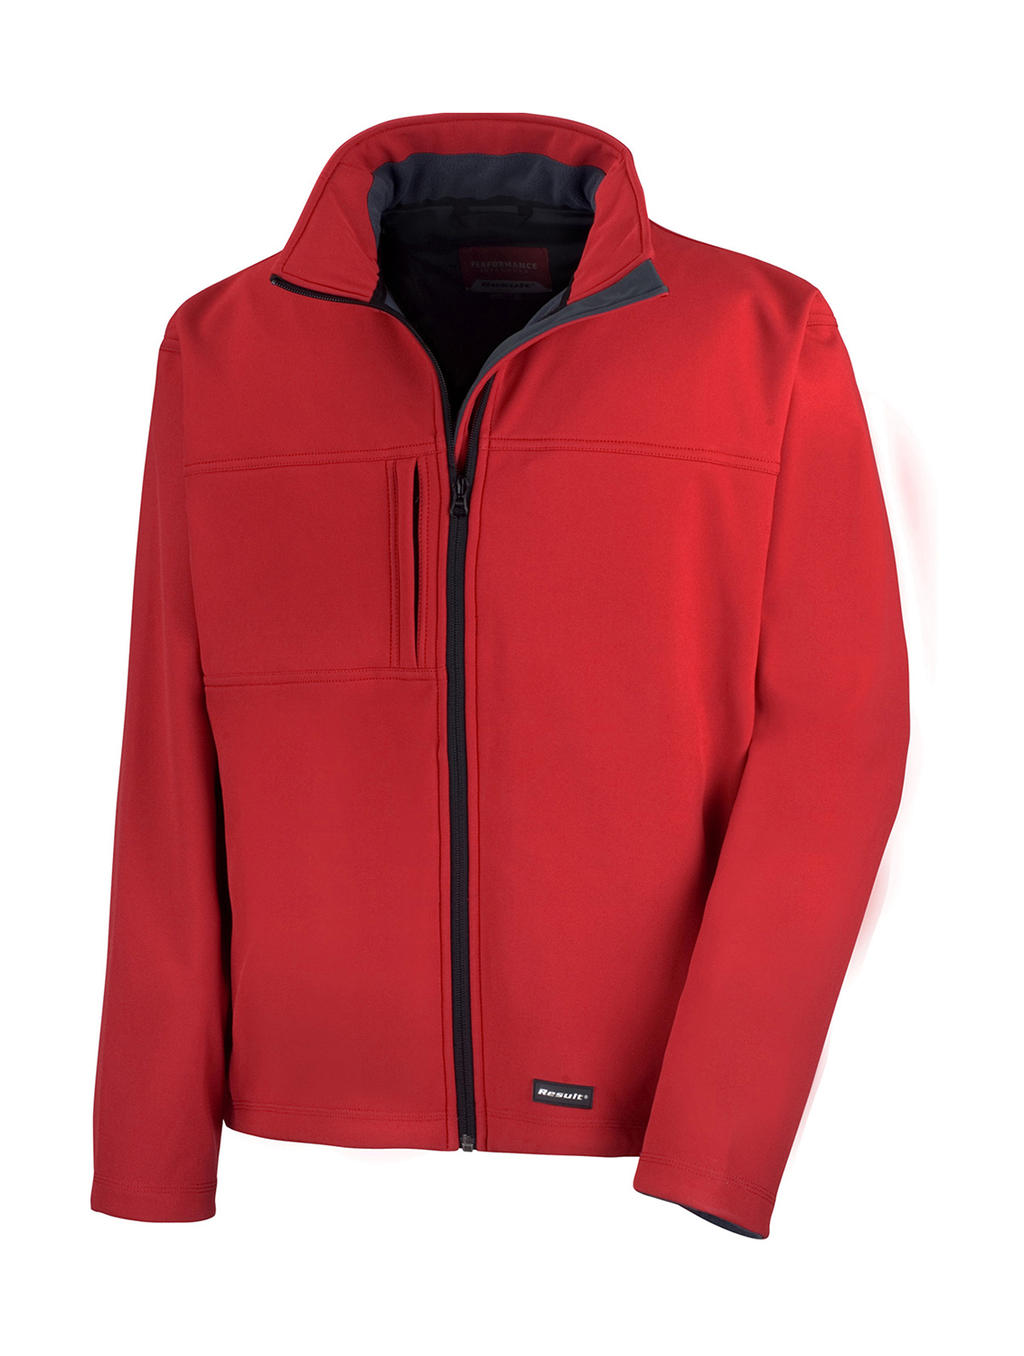  Mens Classic Softshell Jacket in Farbe Red